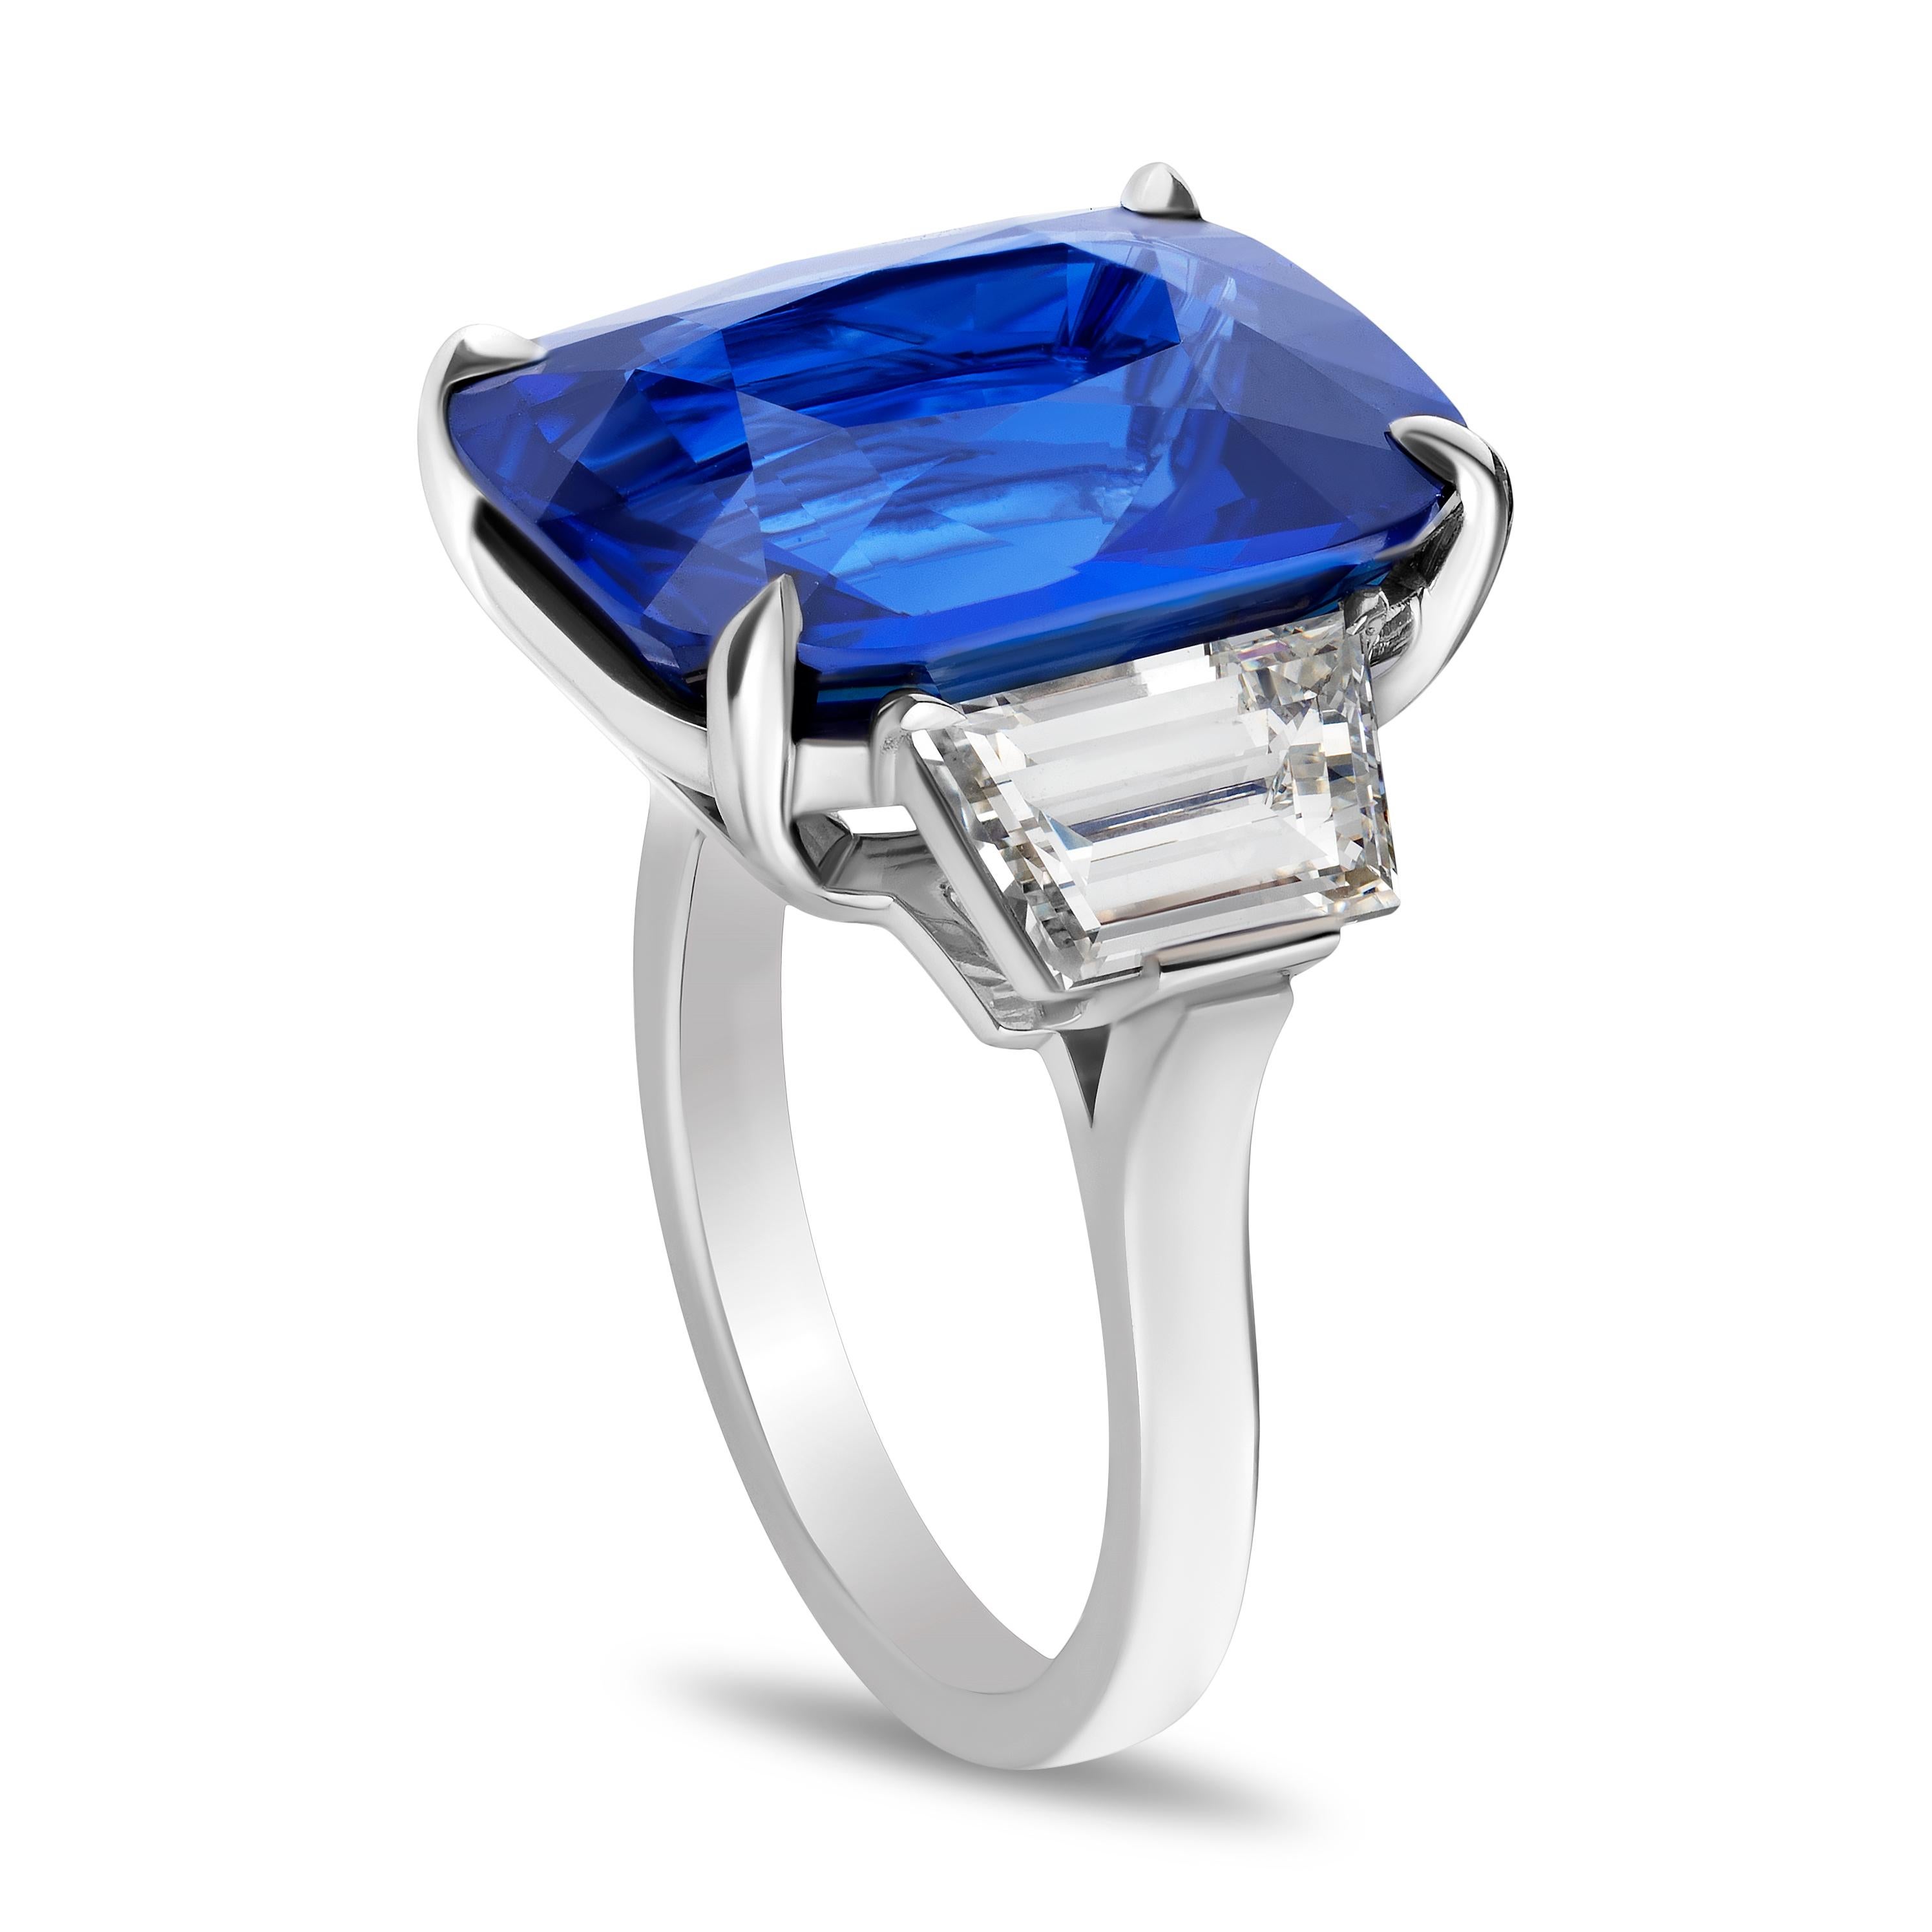 16.01 carat Cushion Blue Sapphire with two Trapezoid Step Cut Diamonds 2.79 carats set in a handmade Platinum ring